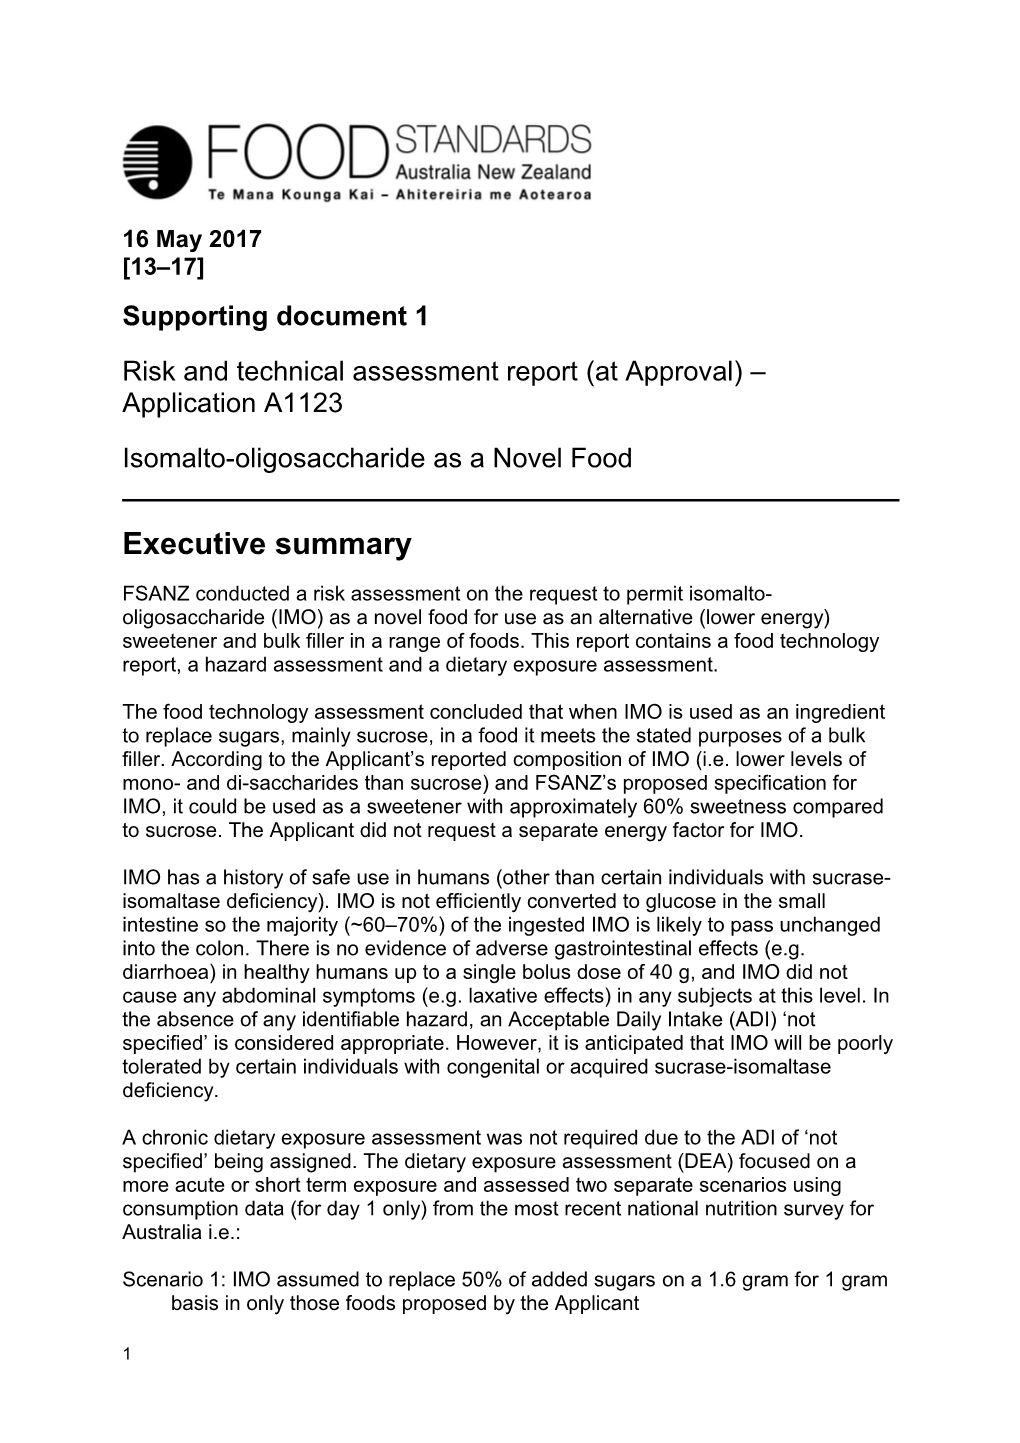 Risk and Technical Assessment Report(At Approval) Application A1123